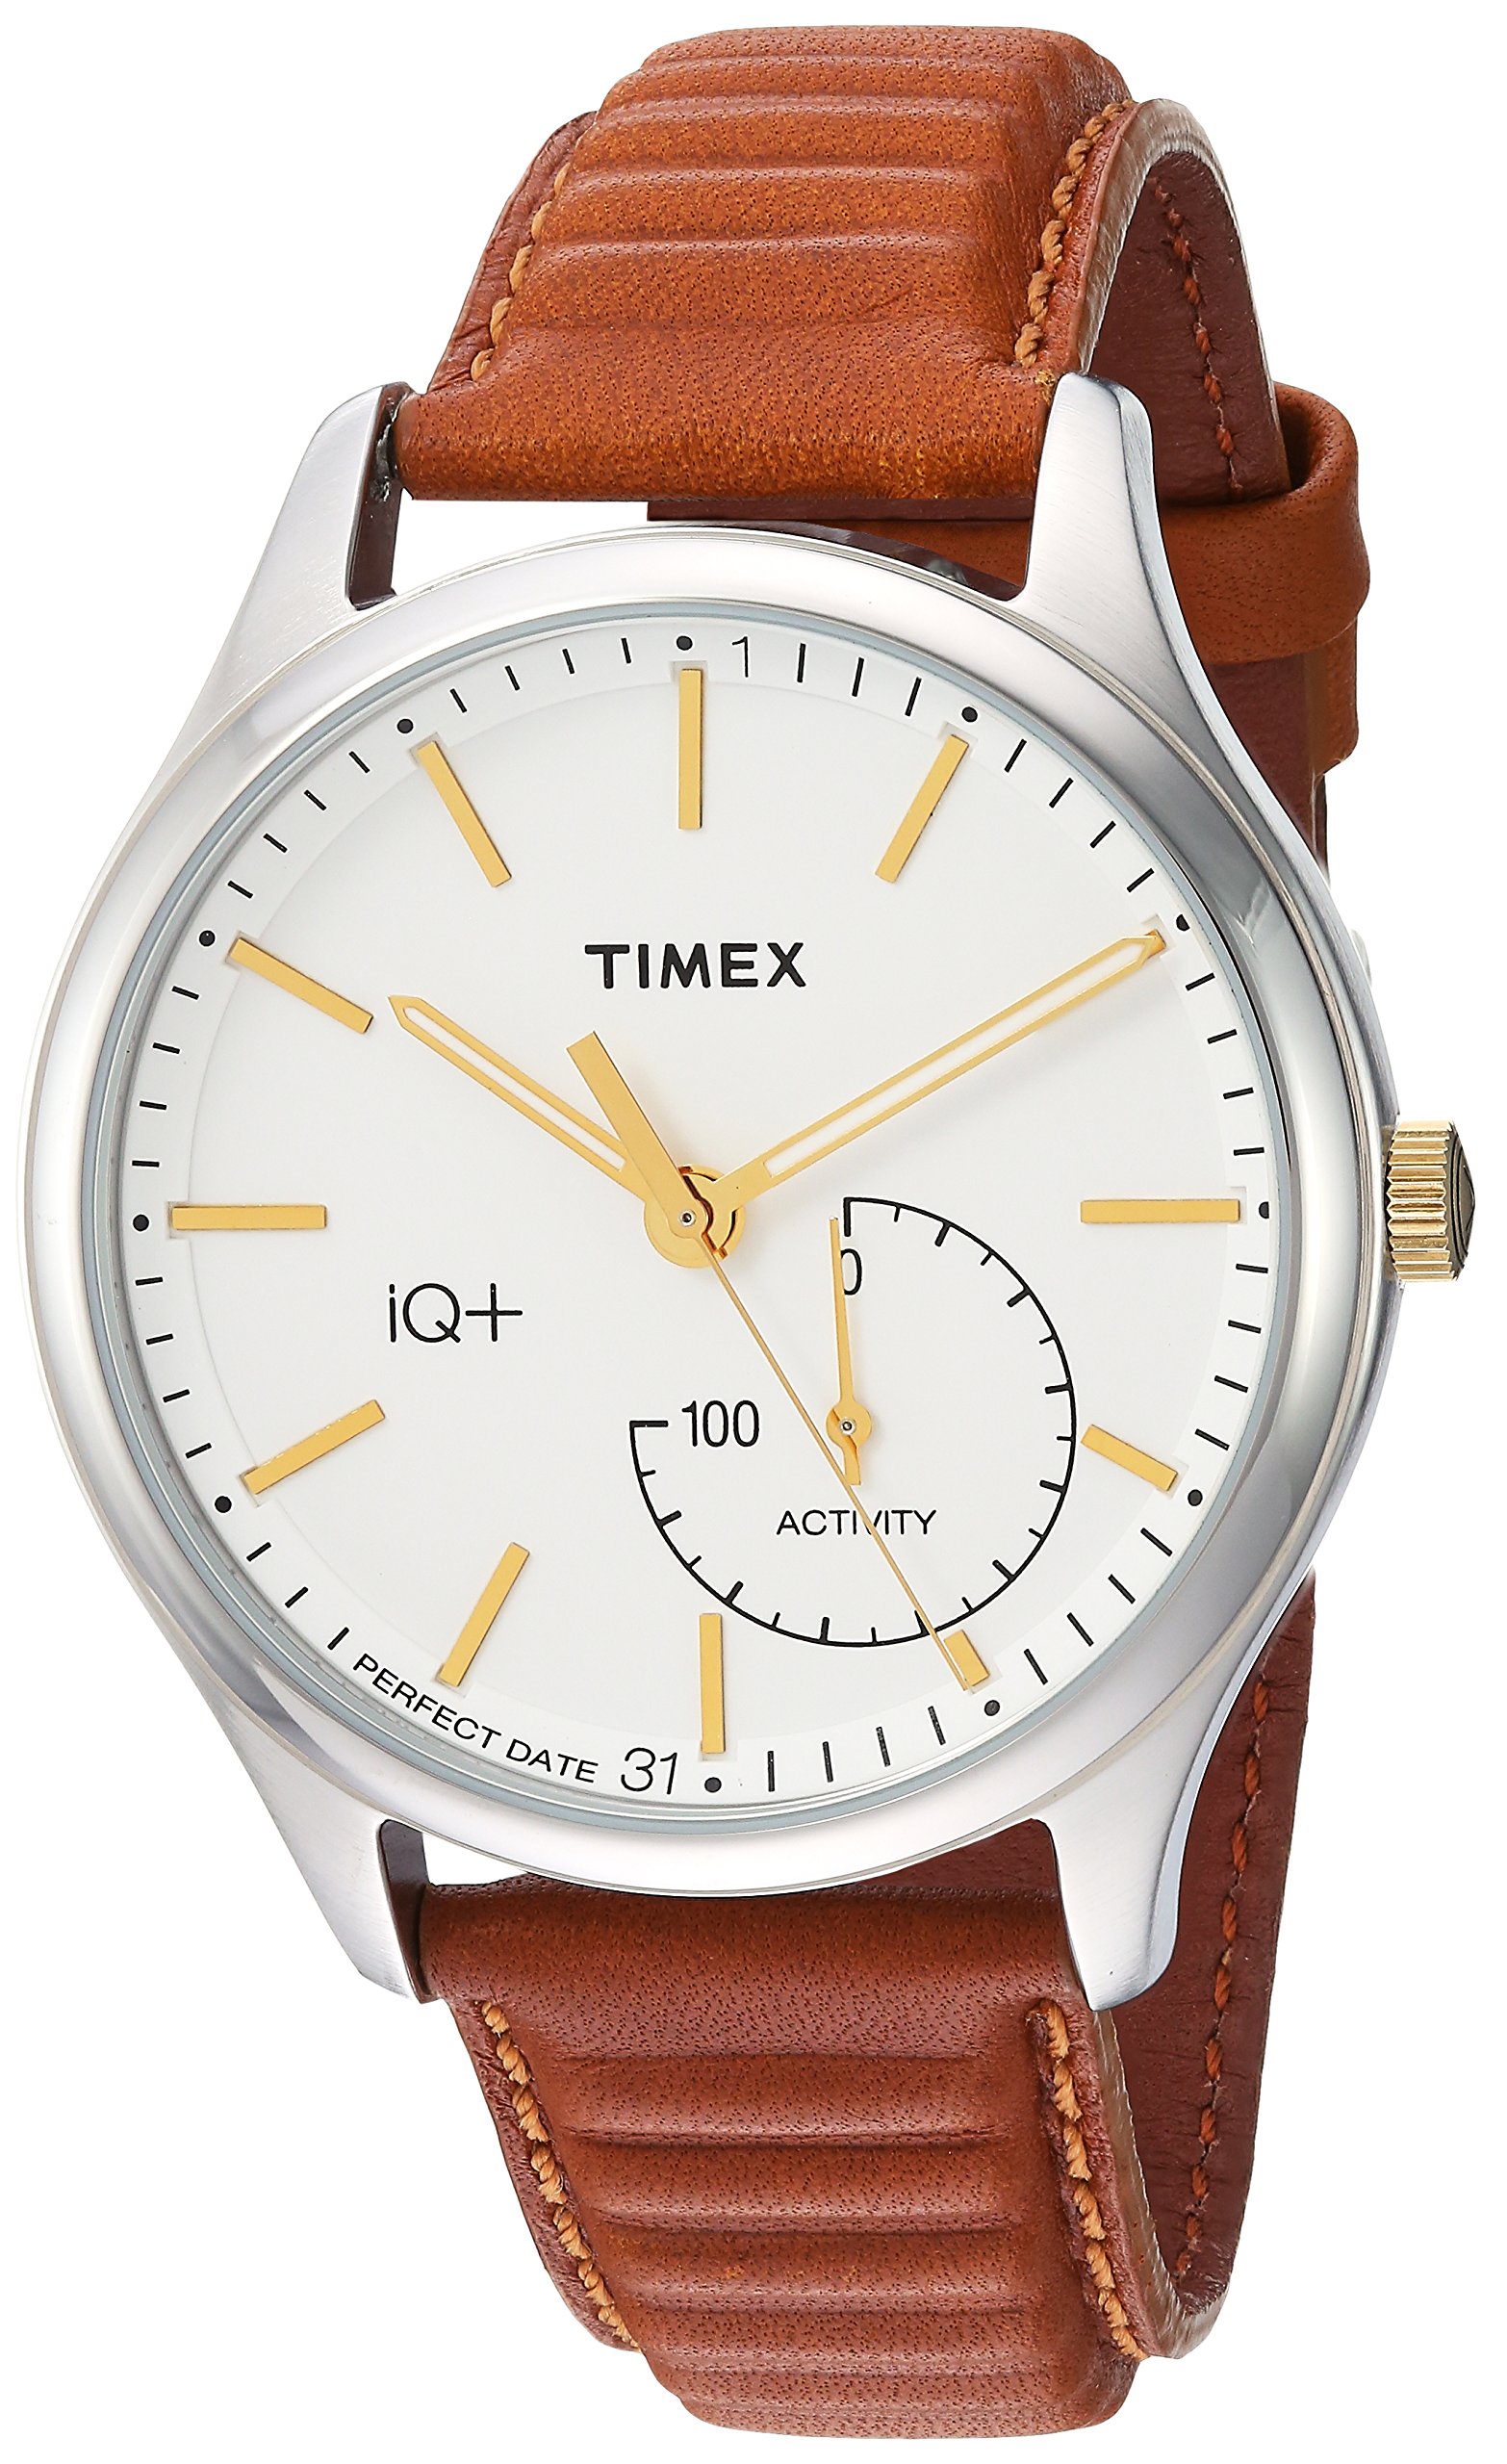 Timex Men's TW2P94700 IQ+ Move Activity Tracker Caramel Brown Leather Strap Smartwatch